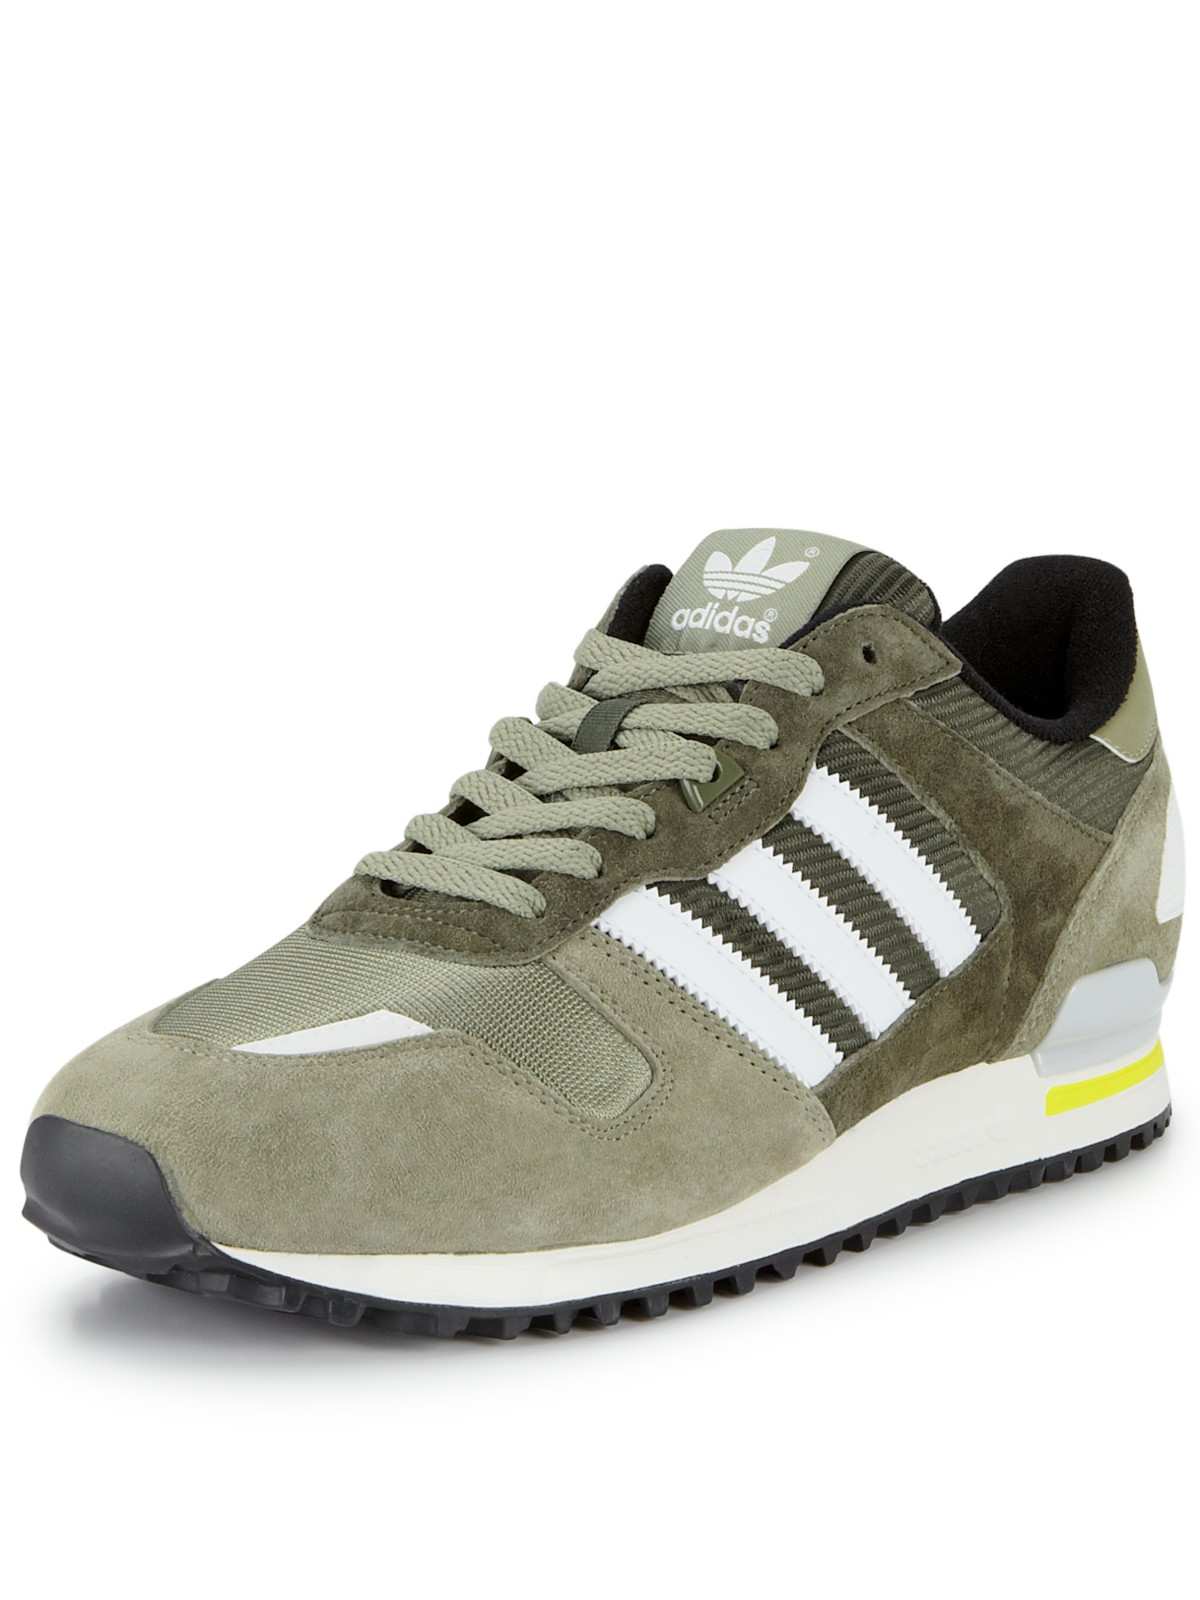 Adidas Adidas Originals Zx700 Mens Trainers in Green for Men (green/white) | Lyst